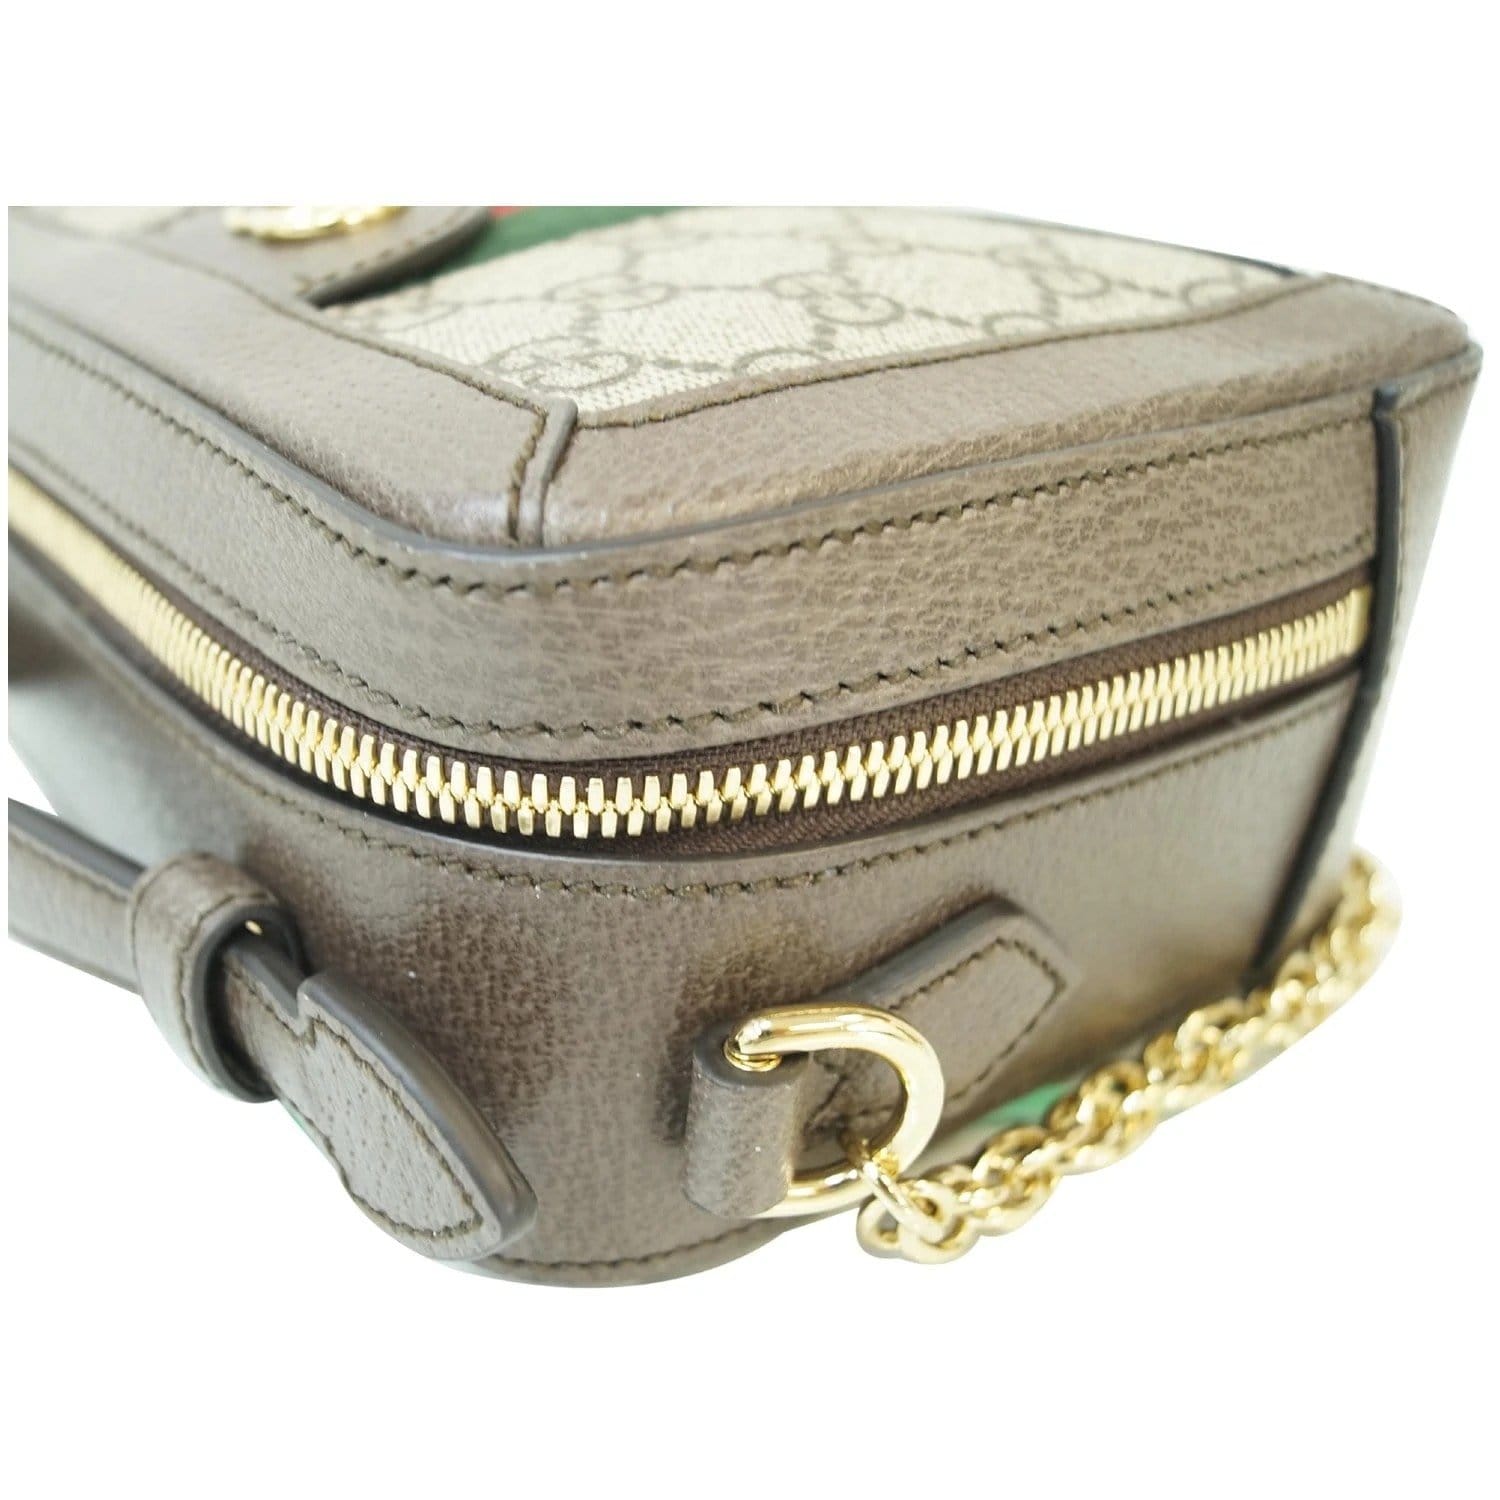 Ophidia small shoulder bag with Web in beige and ebony Supreme